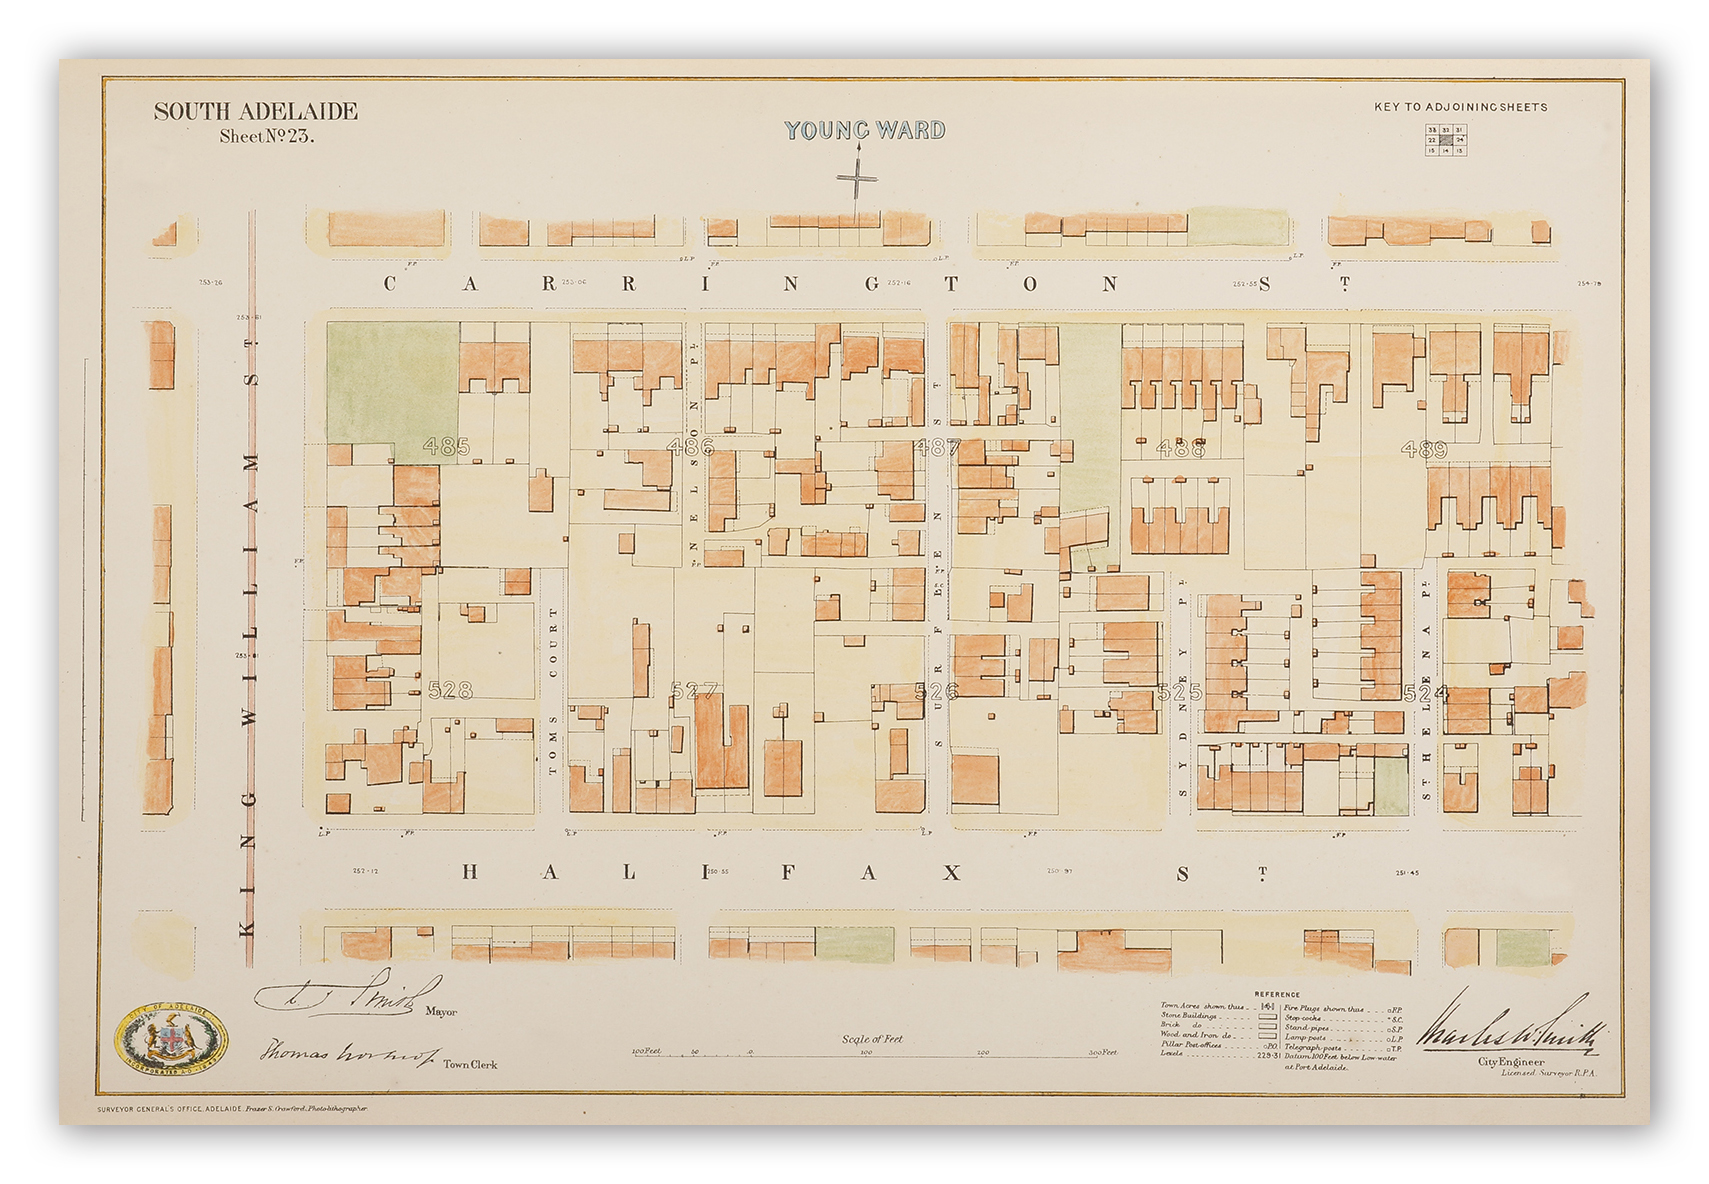 [Carrington St./King William St./Halifax St.] South Adelaide Sheet No. 23. - Antique Map from 1882